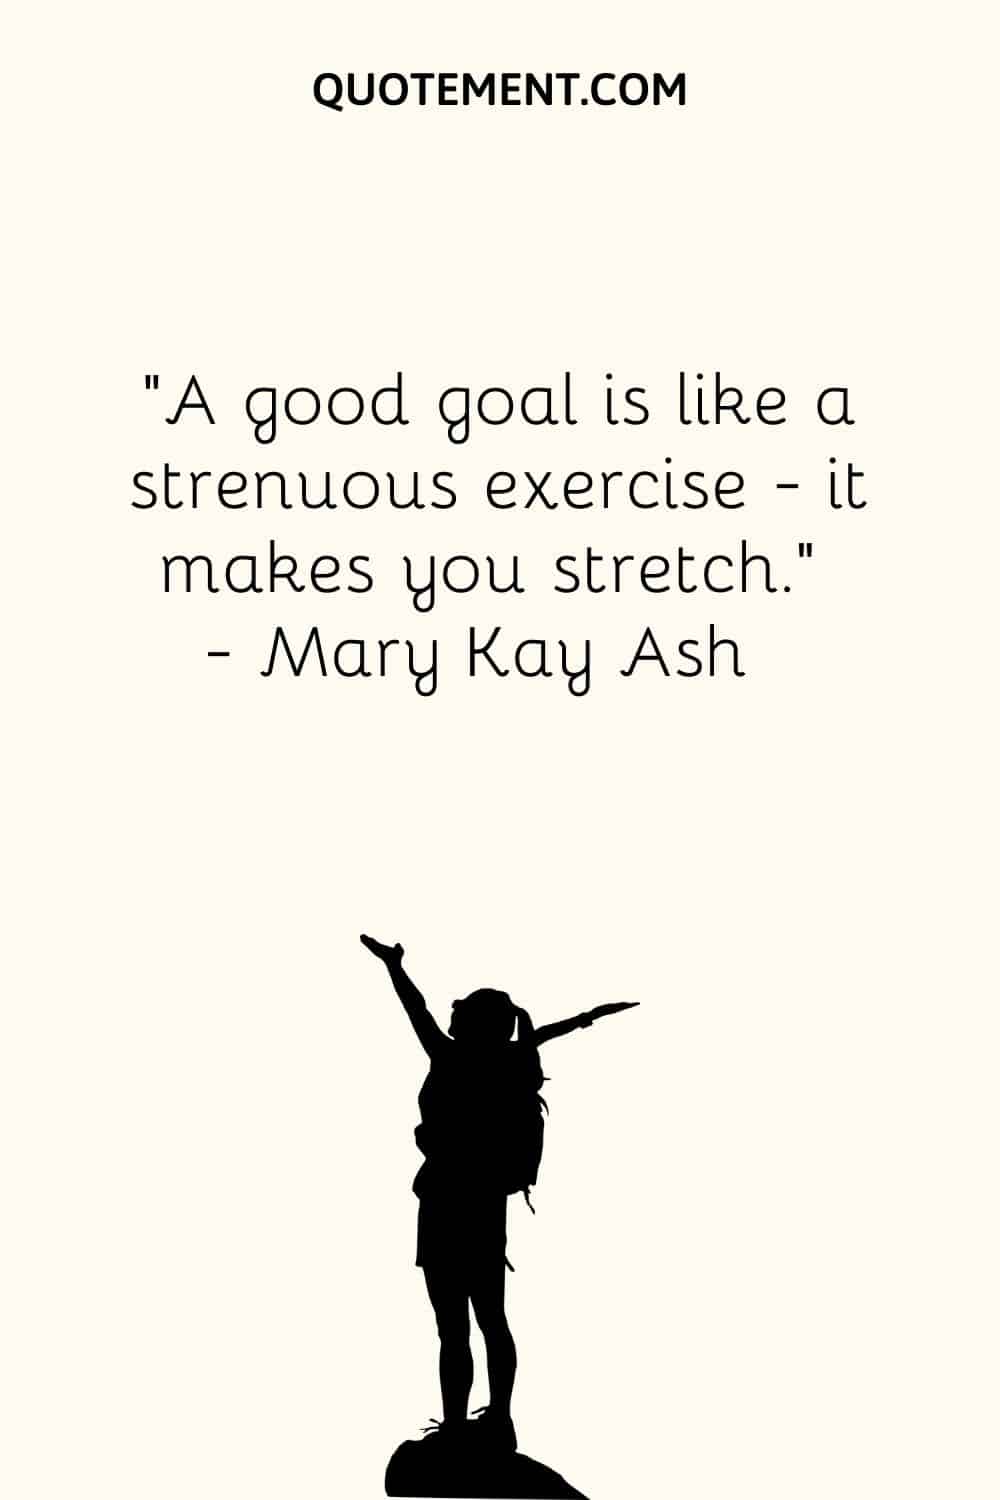 A good goal is like a strenuous exercise — it makes you stretch